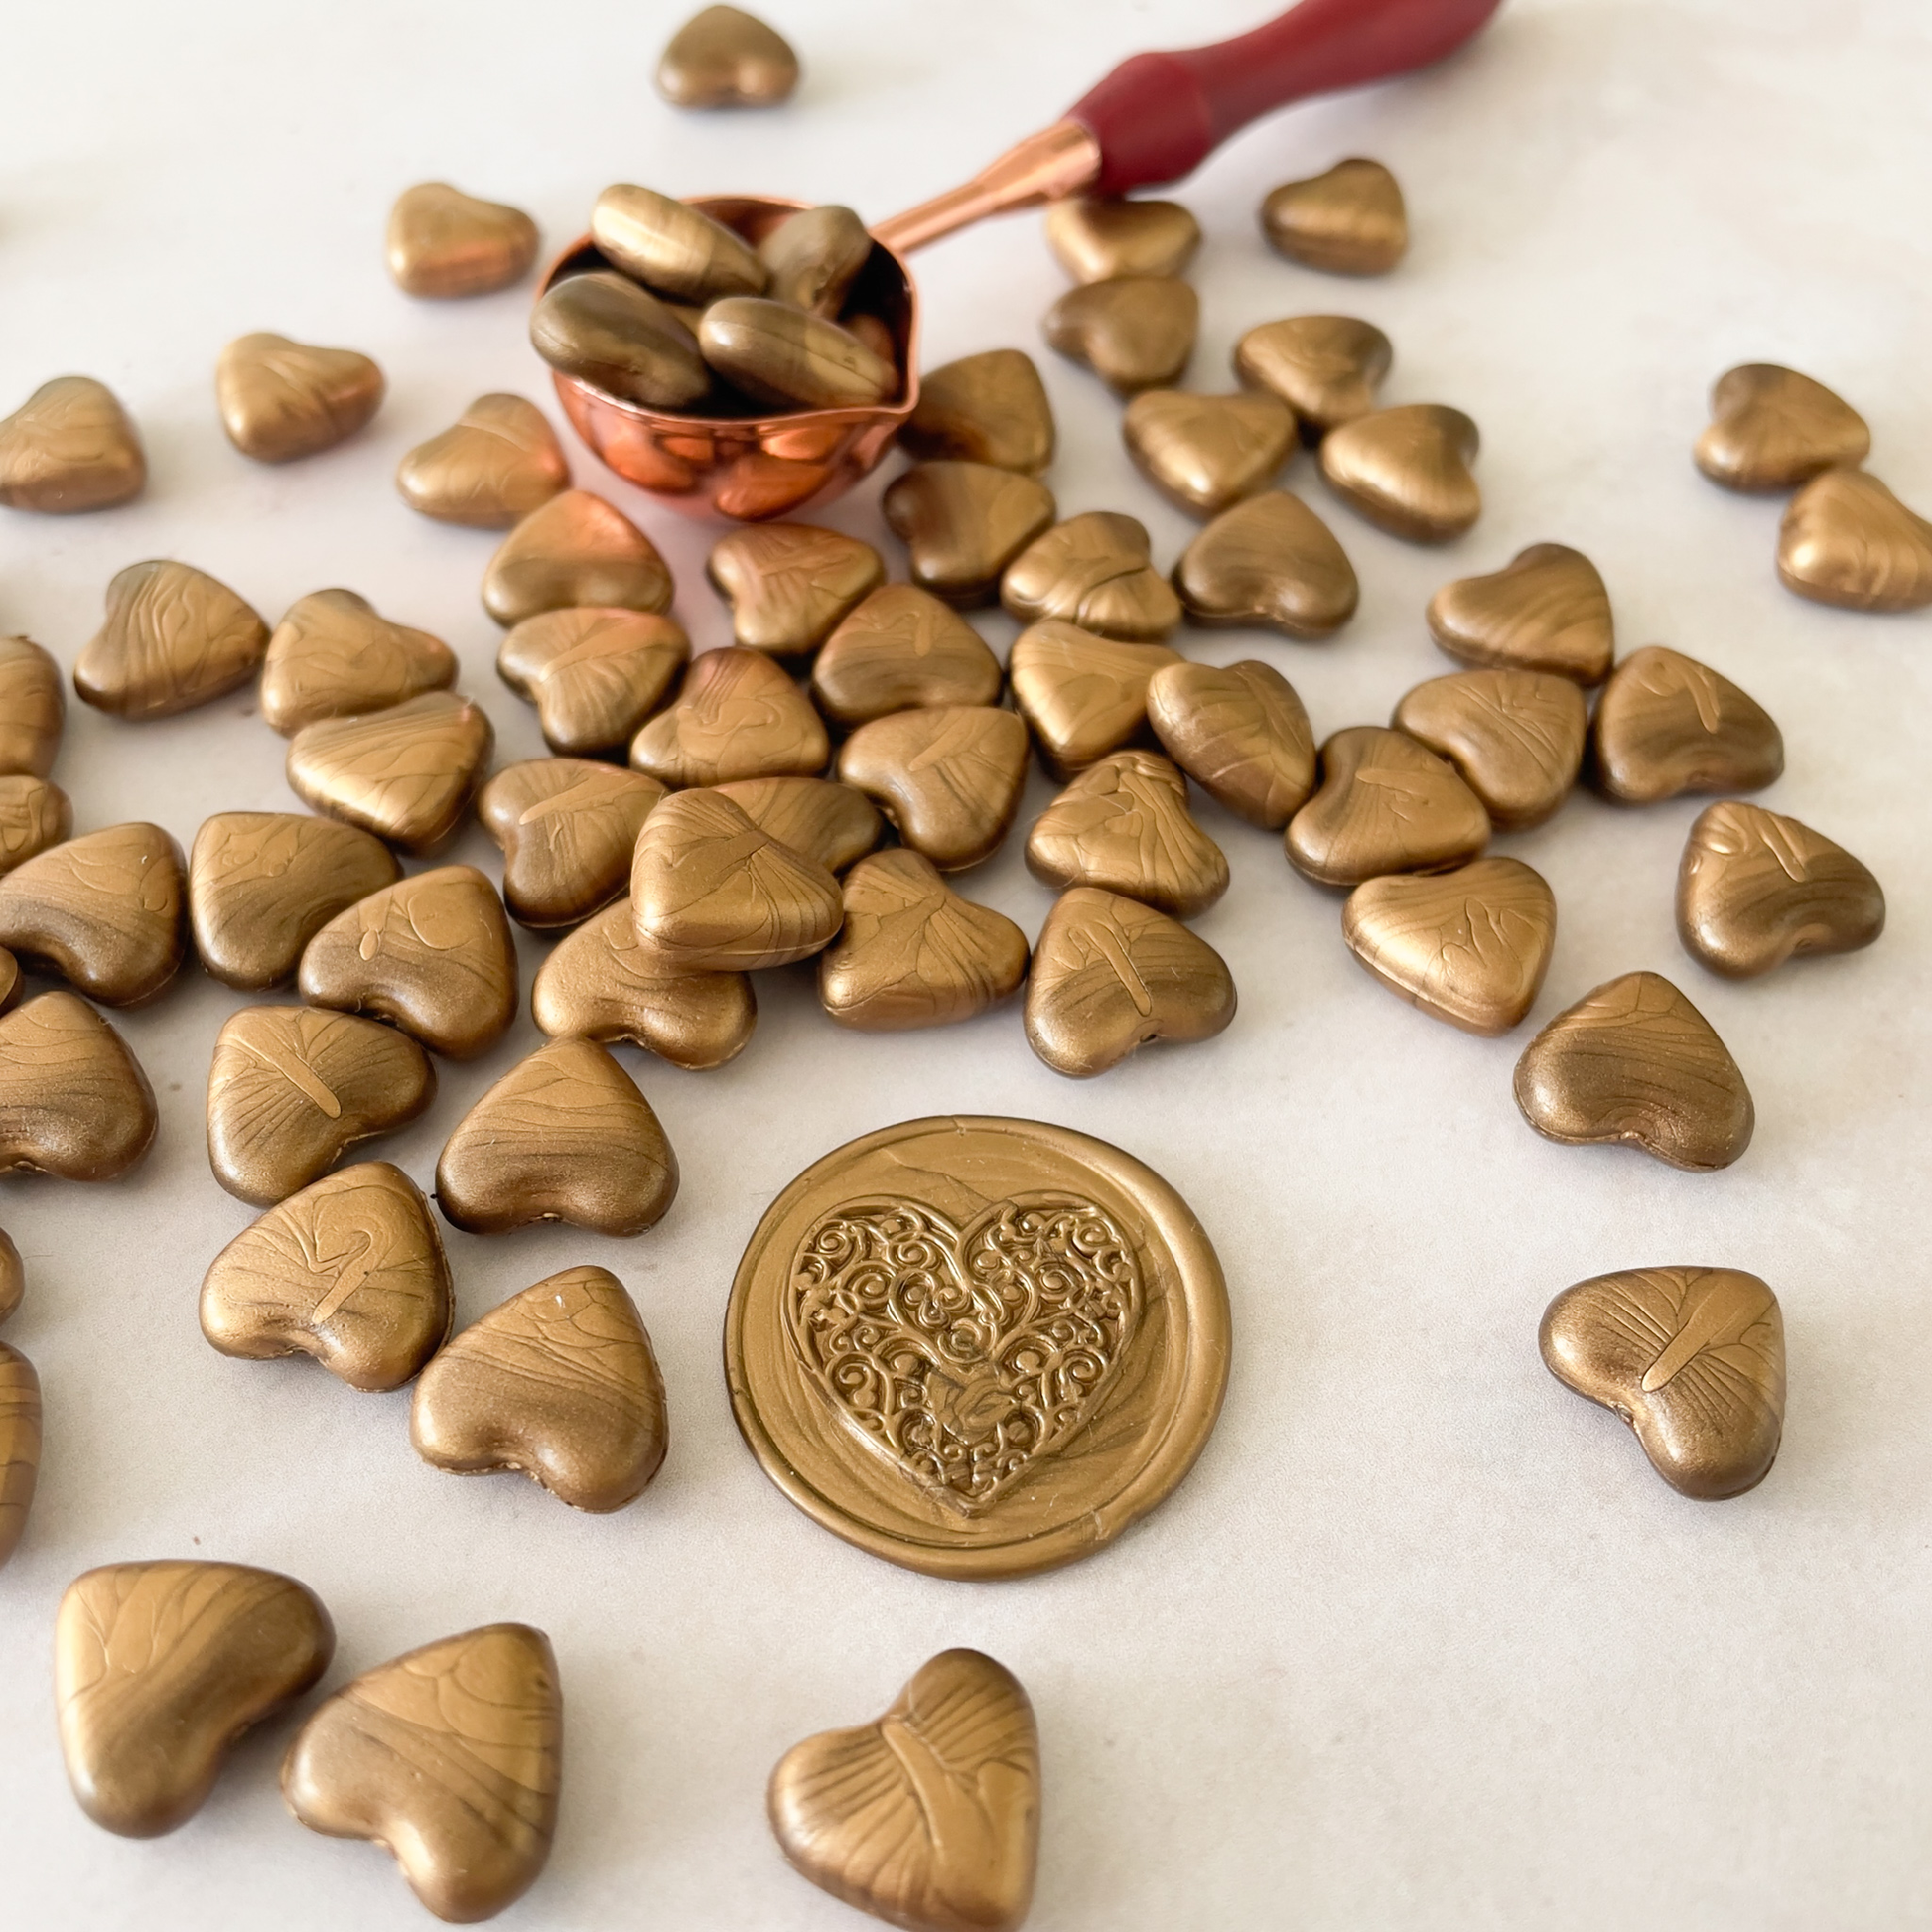 gold sealing wax beads in the shape od a heart.  Small beads of wax to make wax seals and stamps